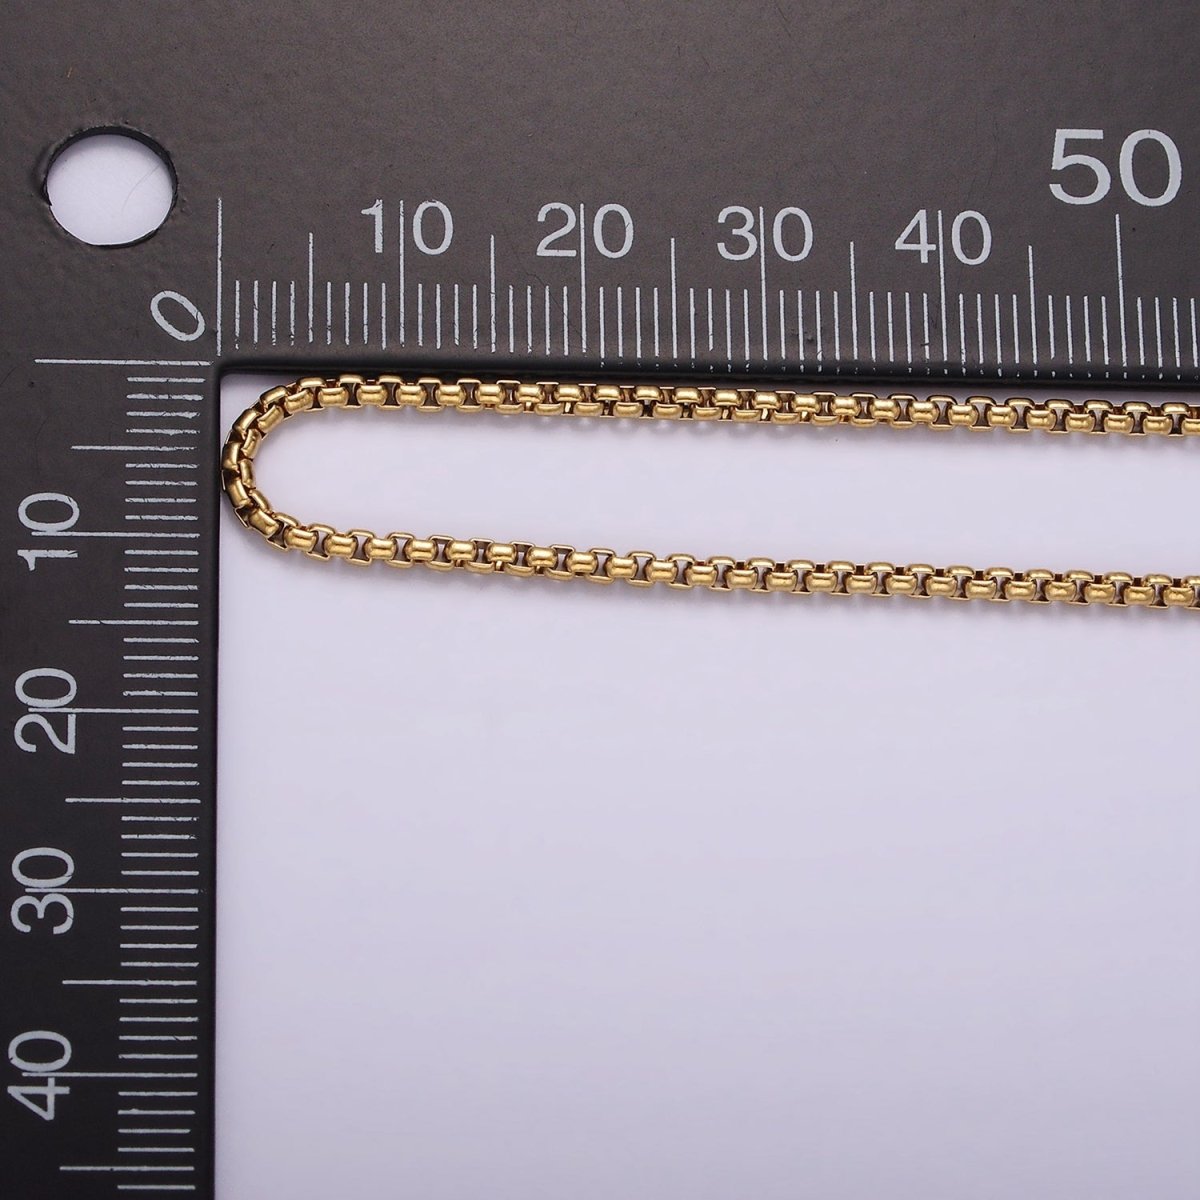 Stainless Steel 2mm Box Chain 18 Inch Necklace | WA-2370 - DLUXCA